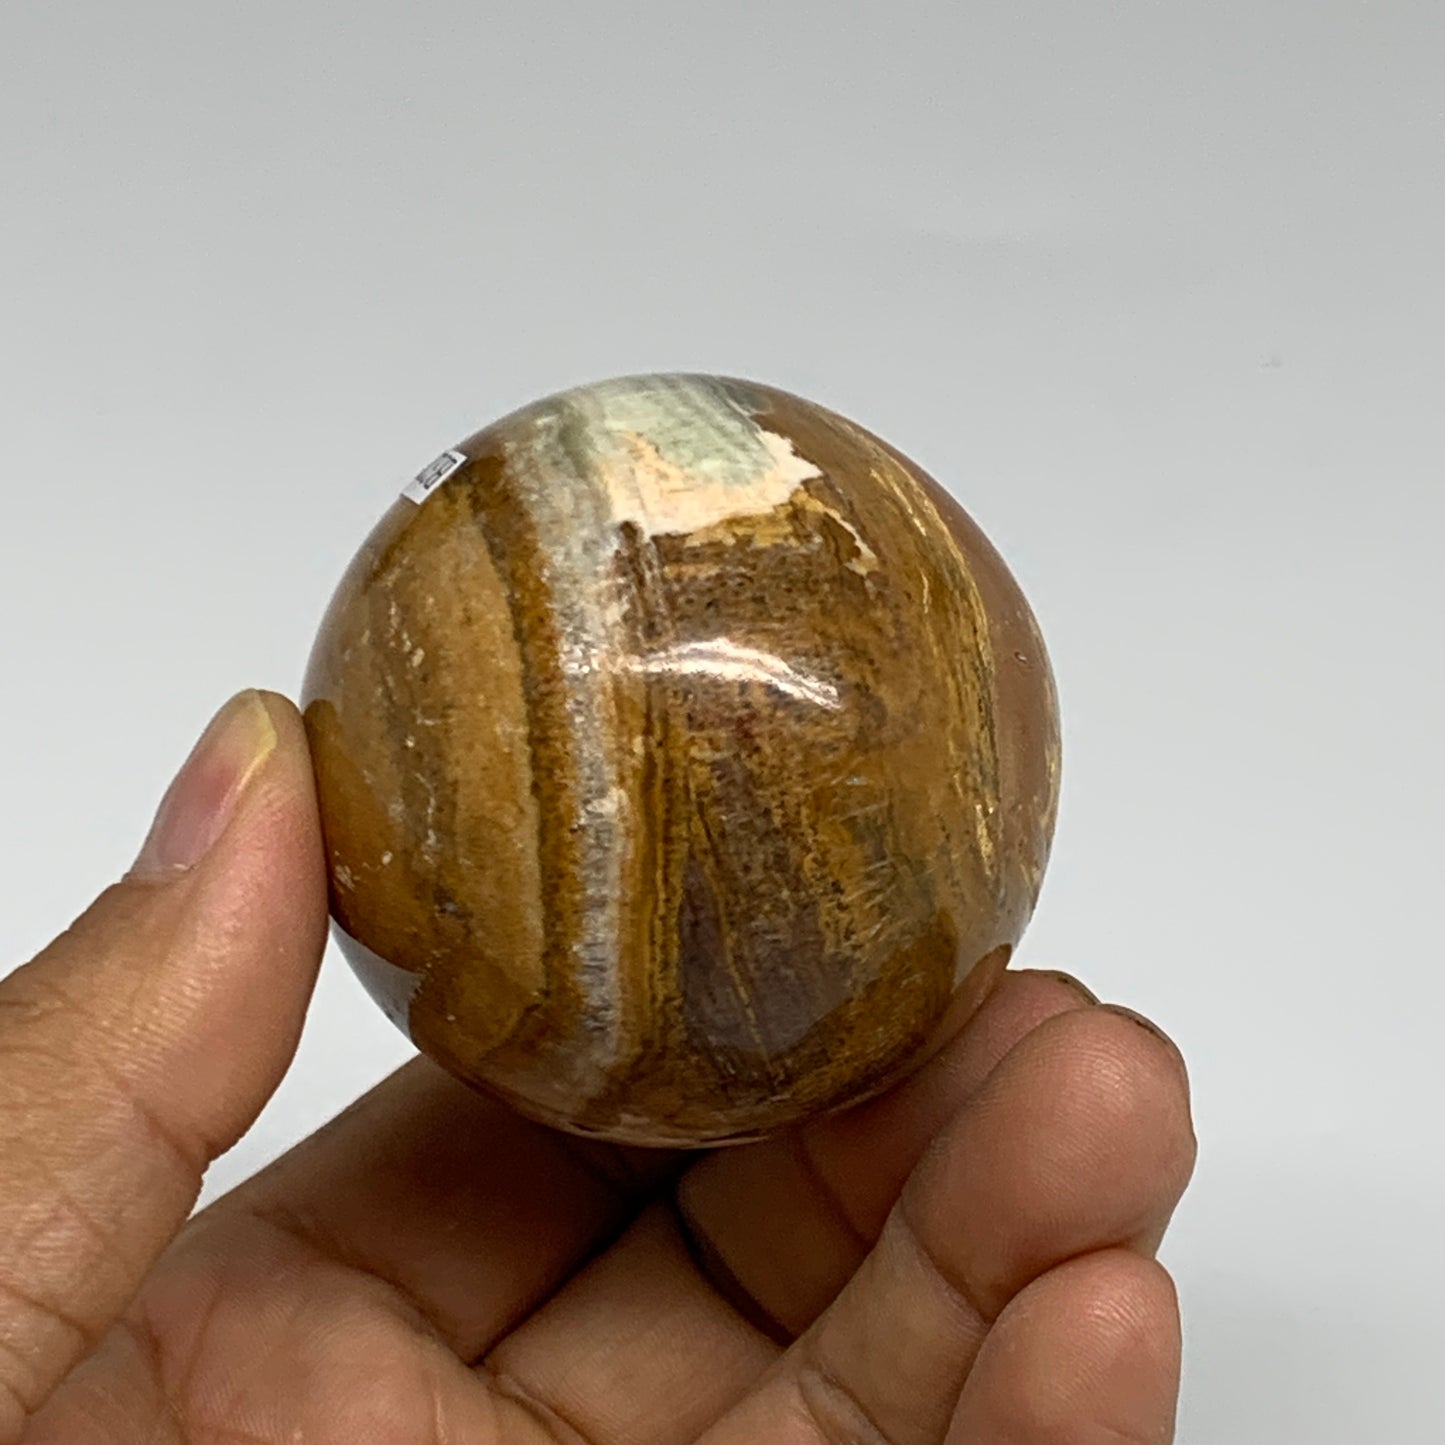 249g, 2.8"x2" Natural Green Onyx Egg Gemstone Mineral, from Pakistan, B32037